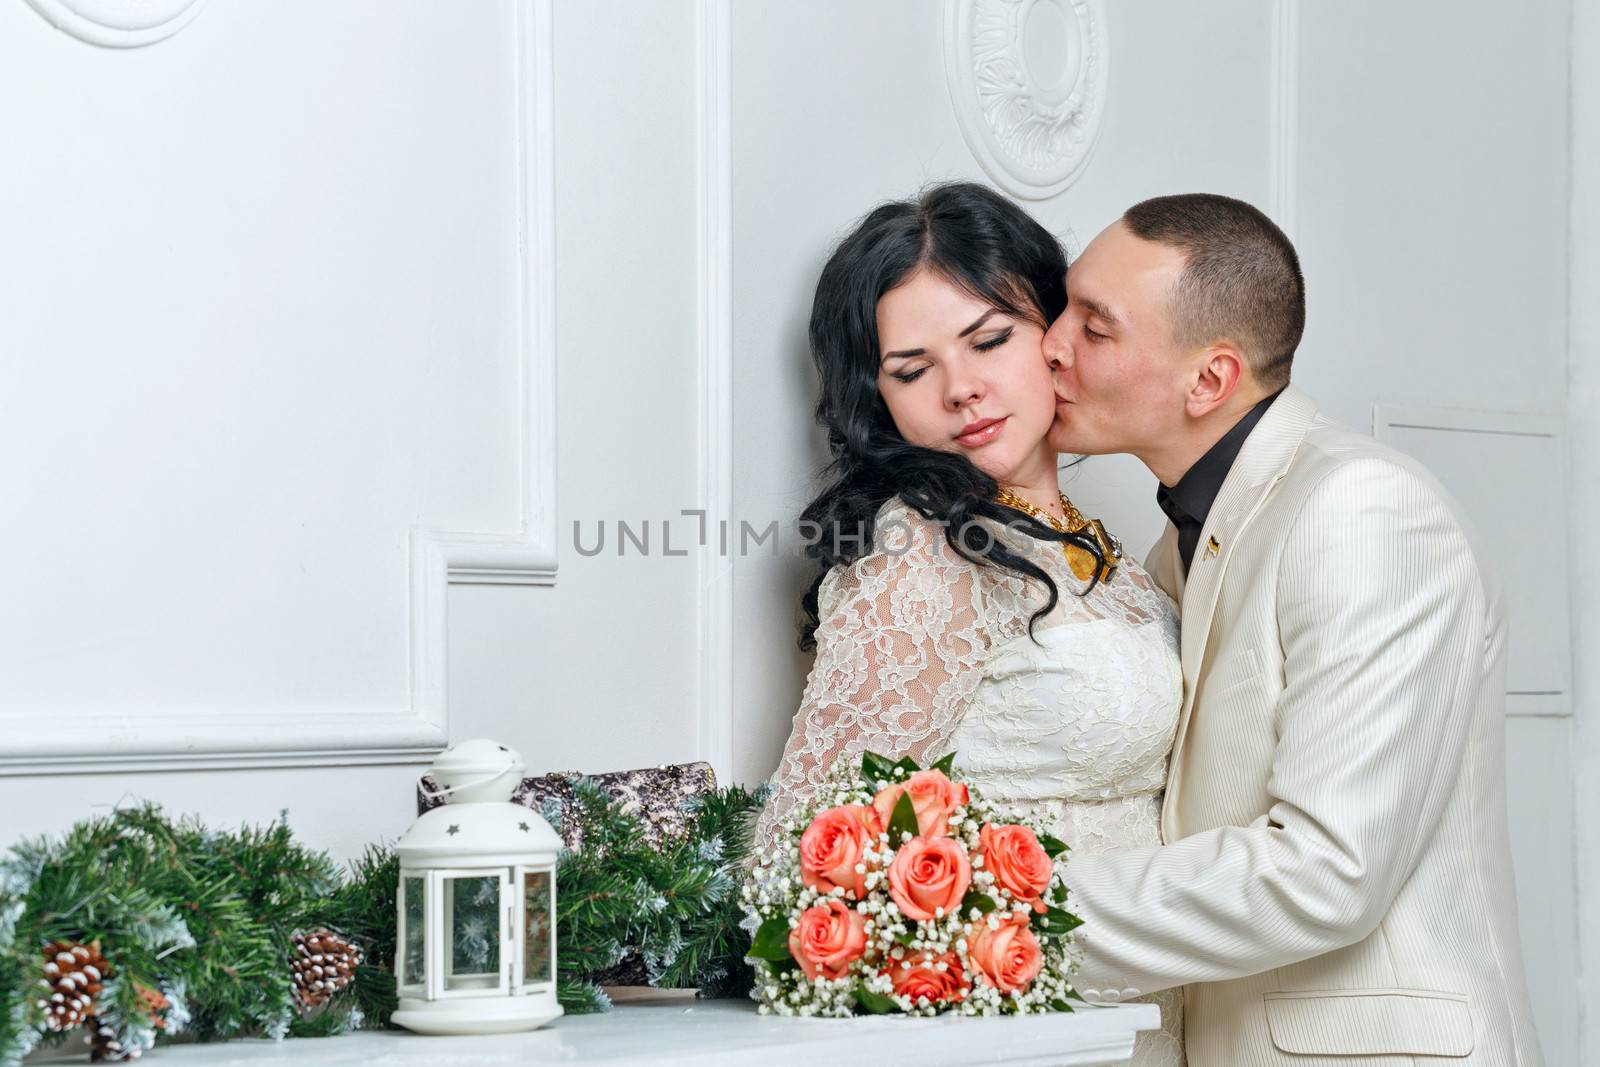 Passionate kiss of young couple near bouquet of roses